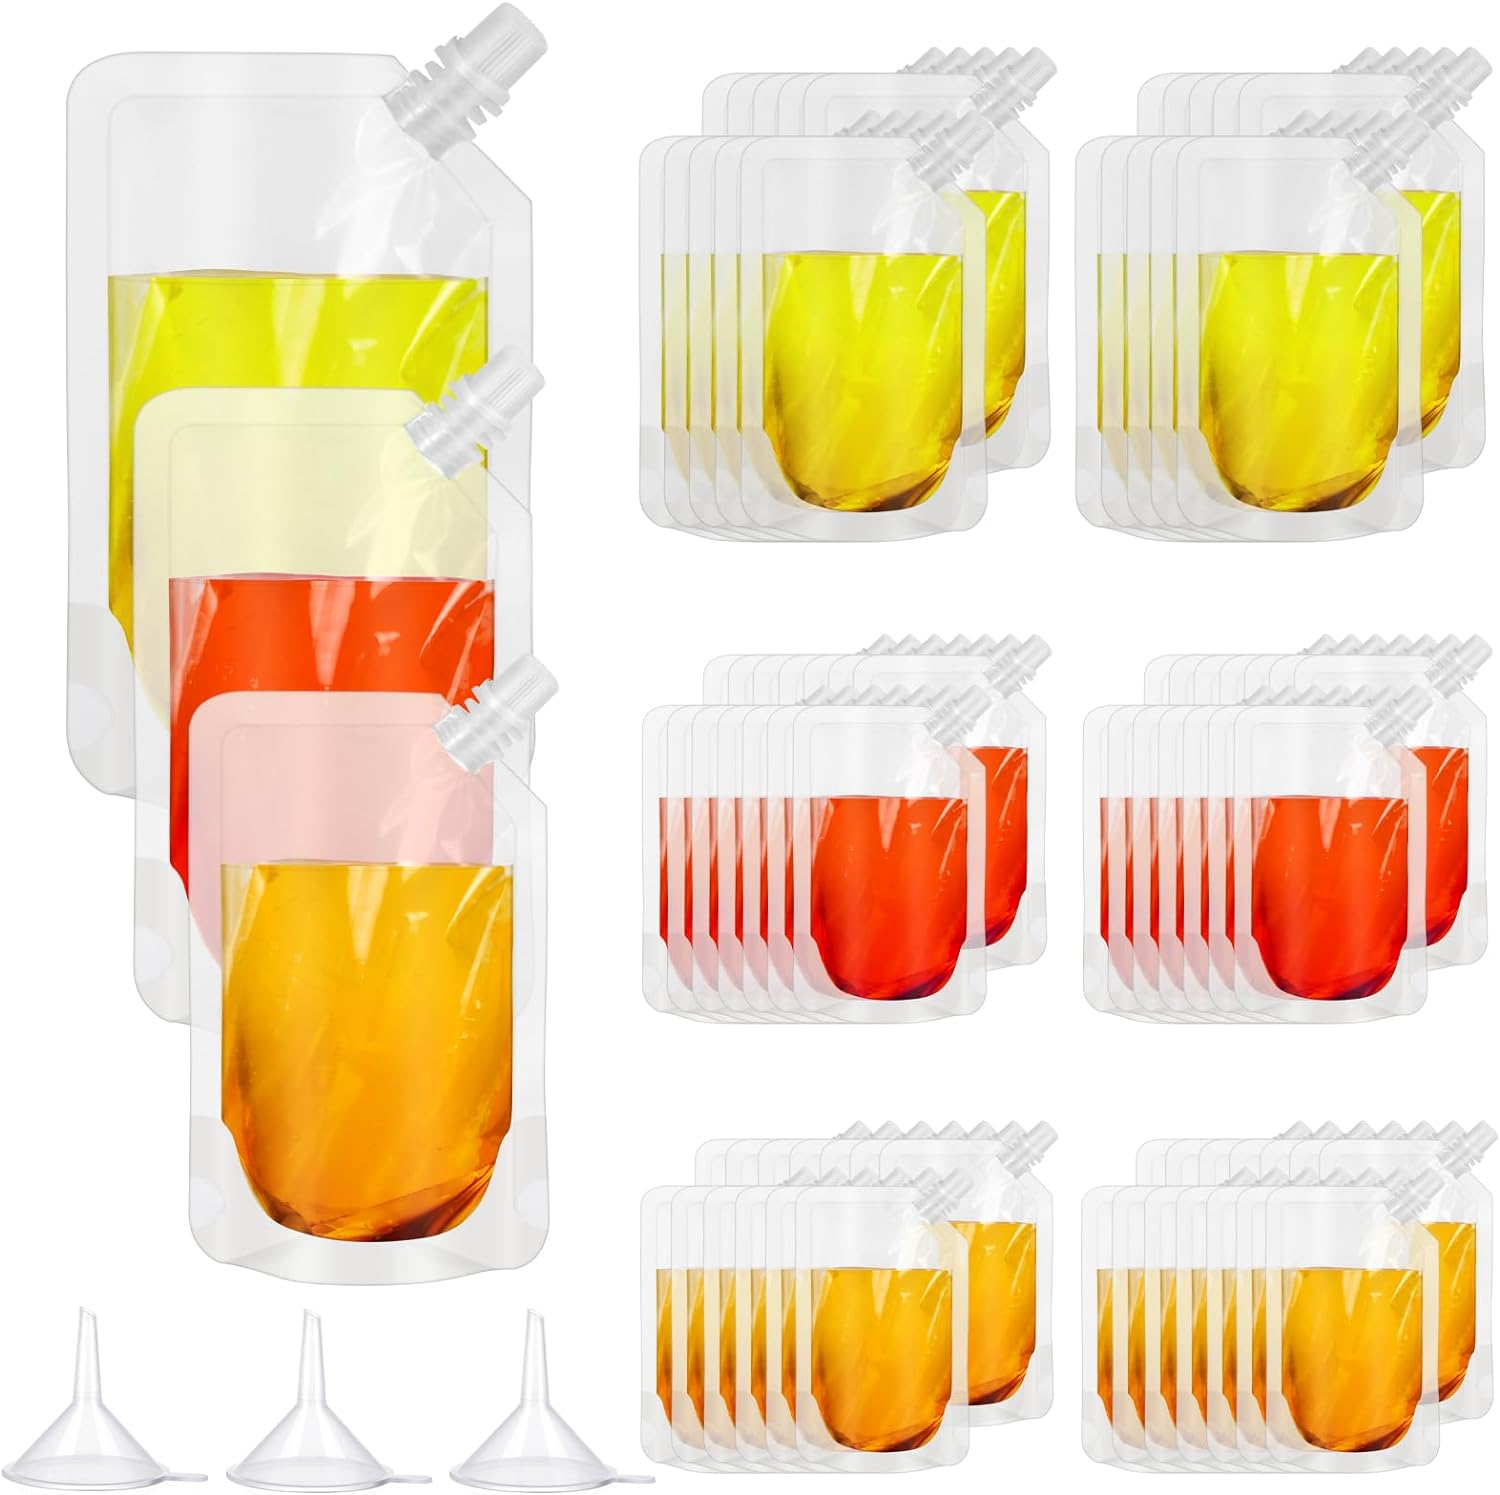  24 Pcs Plastic Flasks, 8 Oz Concealable and Reusable Drink  Pouches, Leak-Proof Food Grade Plastic for Travel : Home & Kitchen